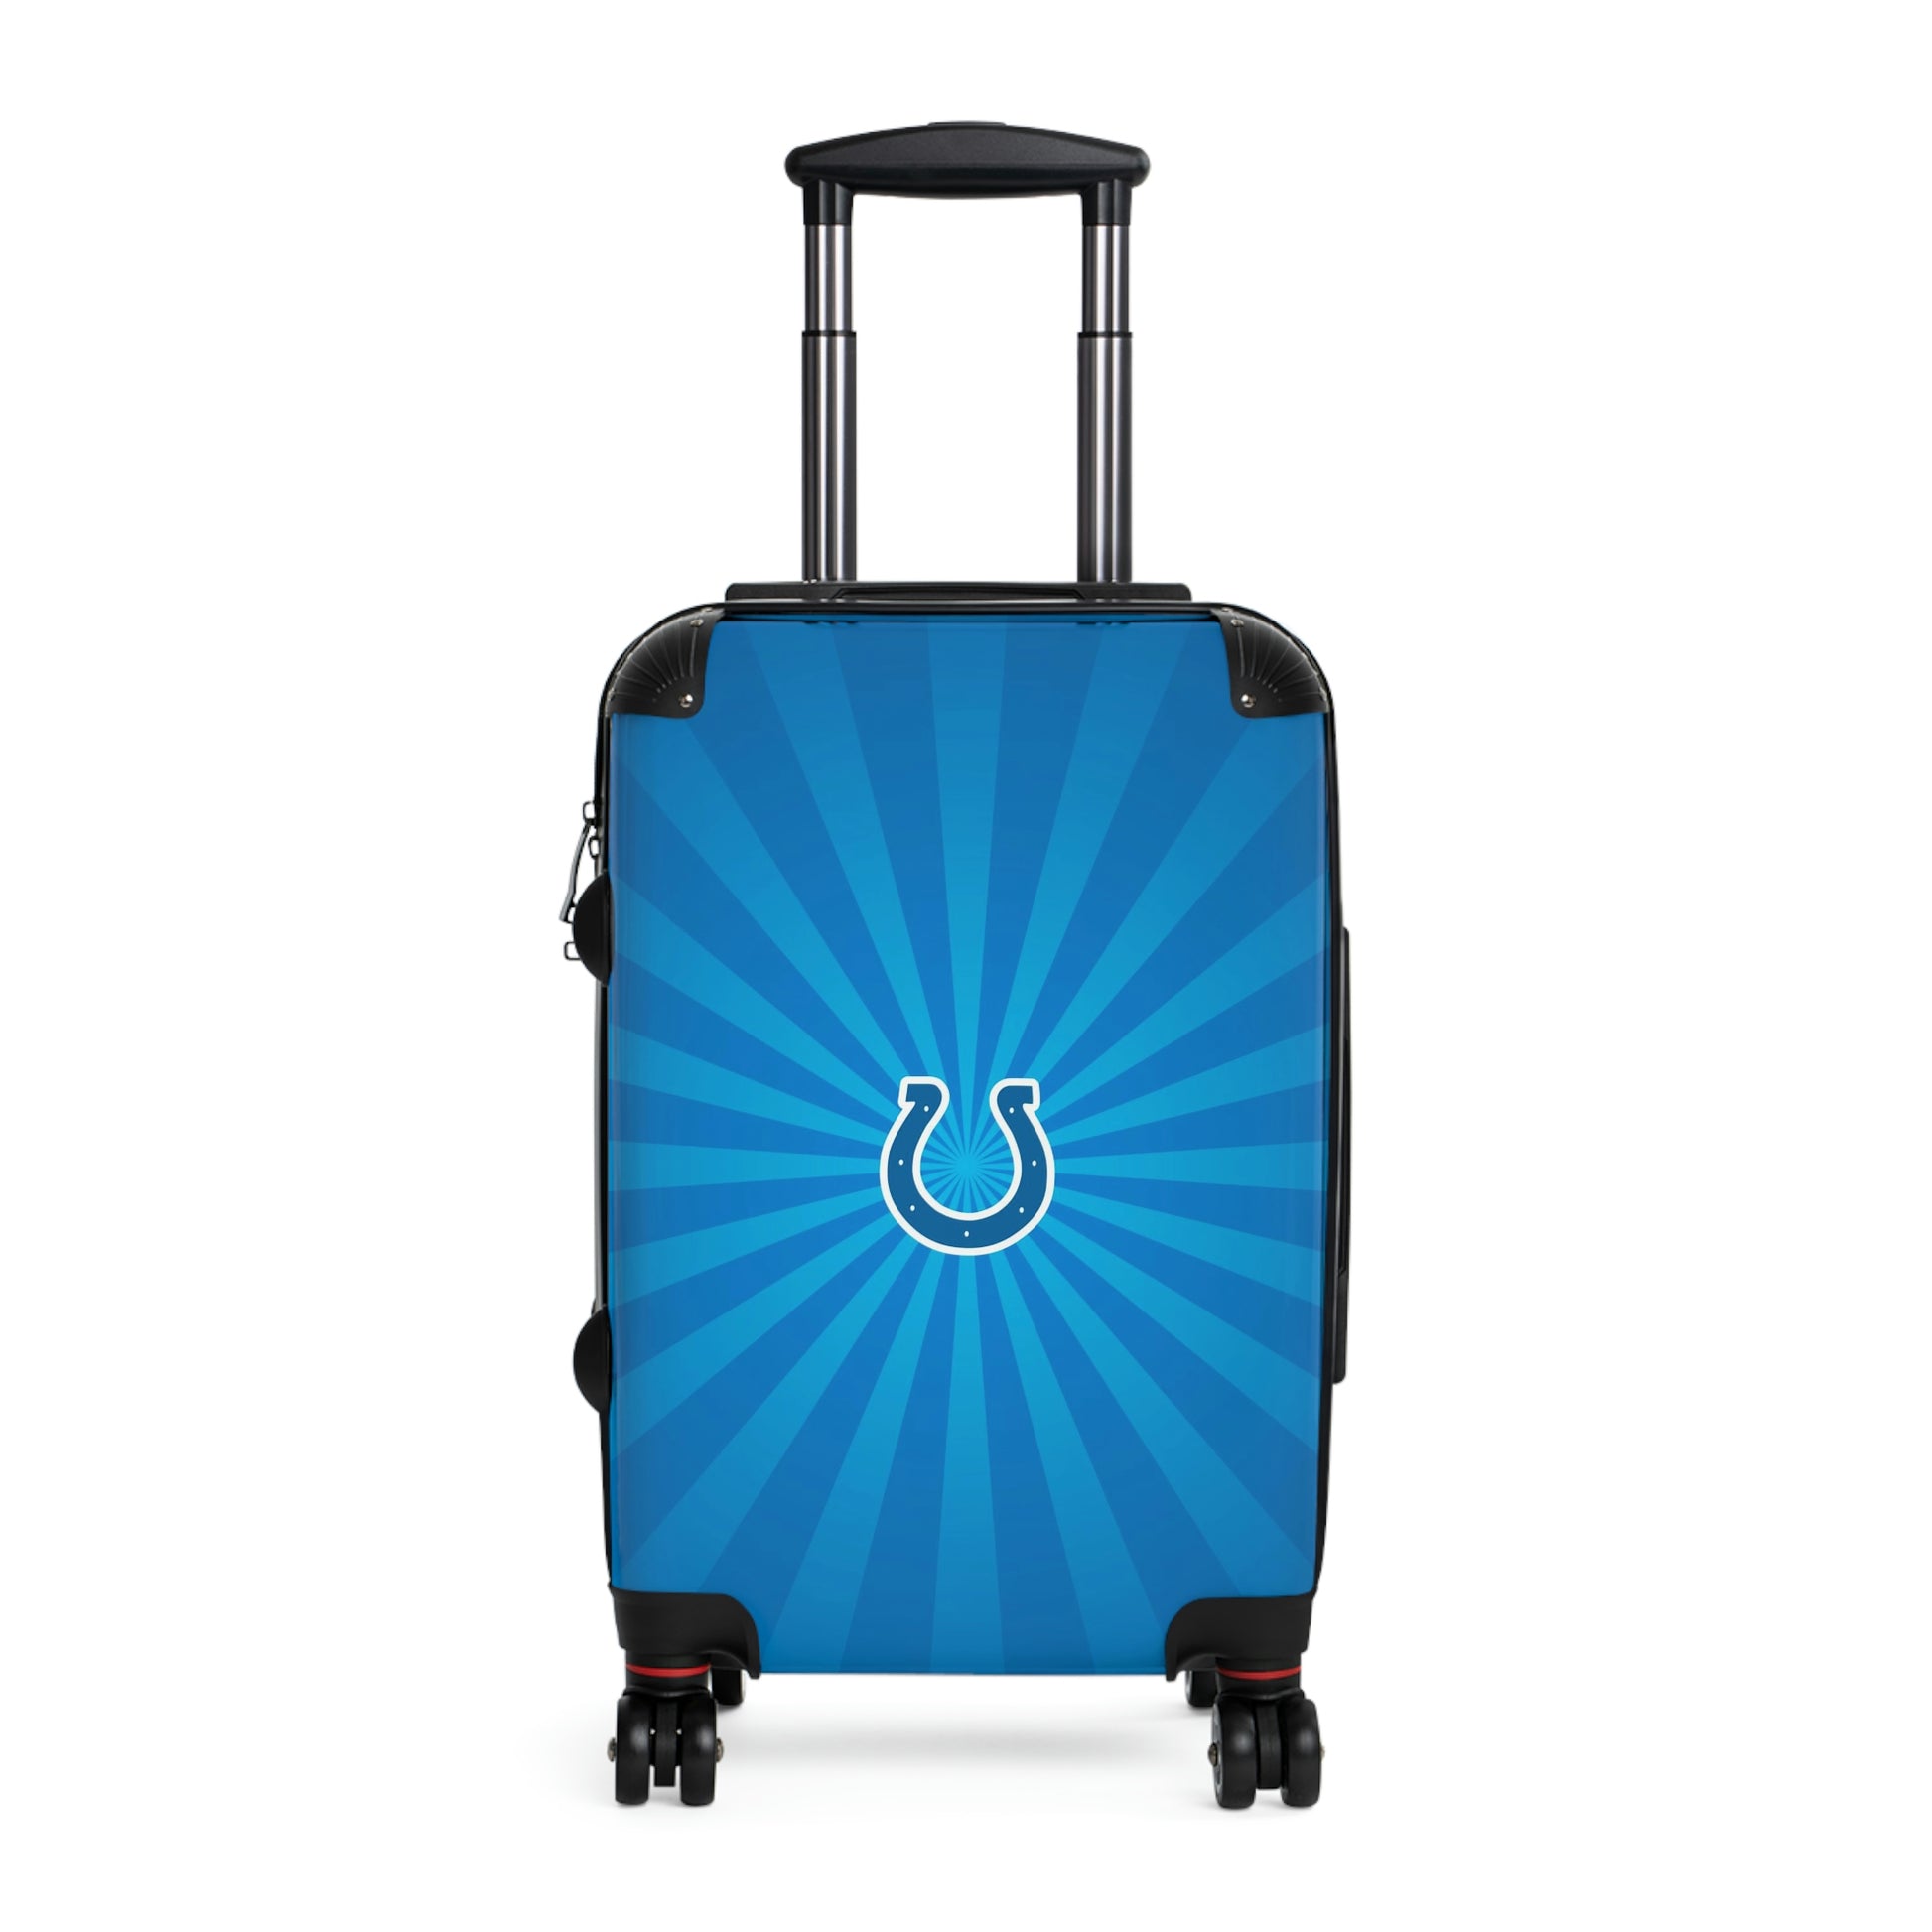 Geotrott Indianapolis Colts National Football League NFL Team Logo Cabin Suitcase Rolling Luggage Checking Bag